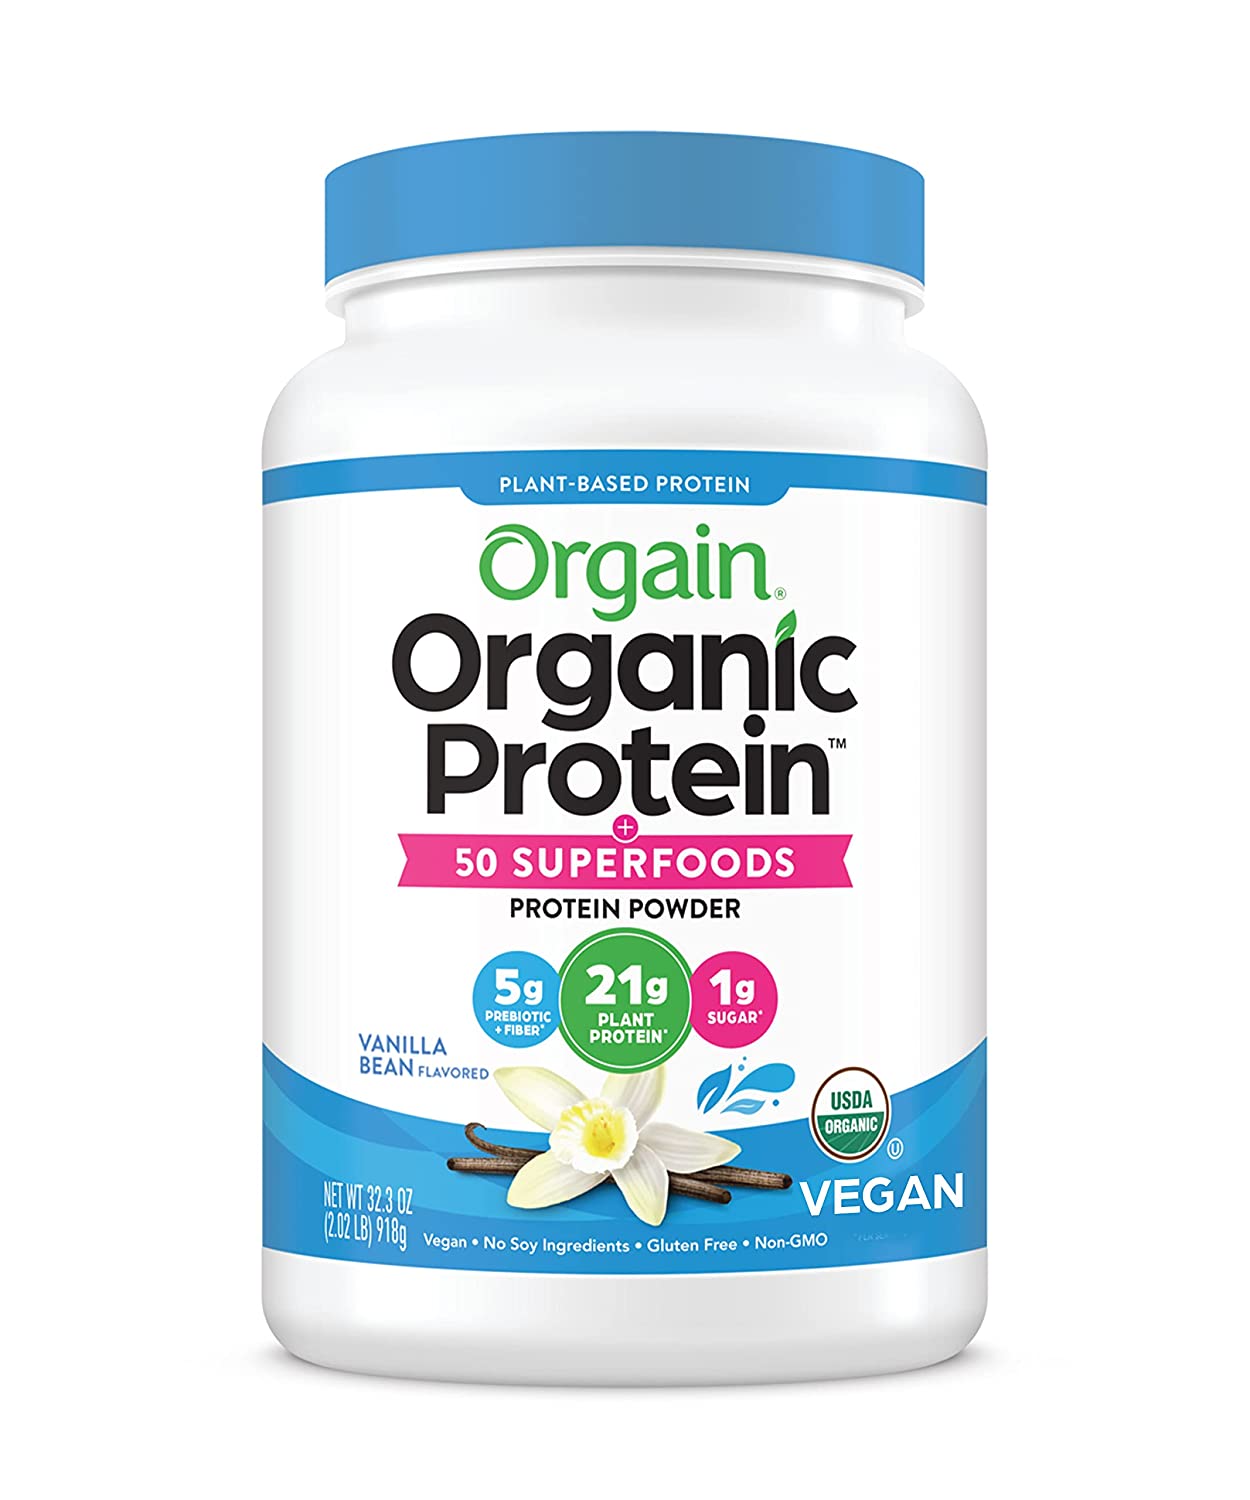 Orgain Organic Protein And Superfoods